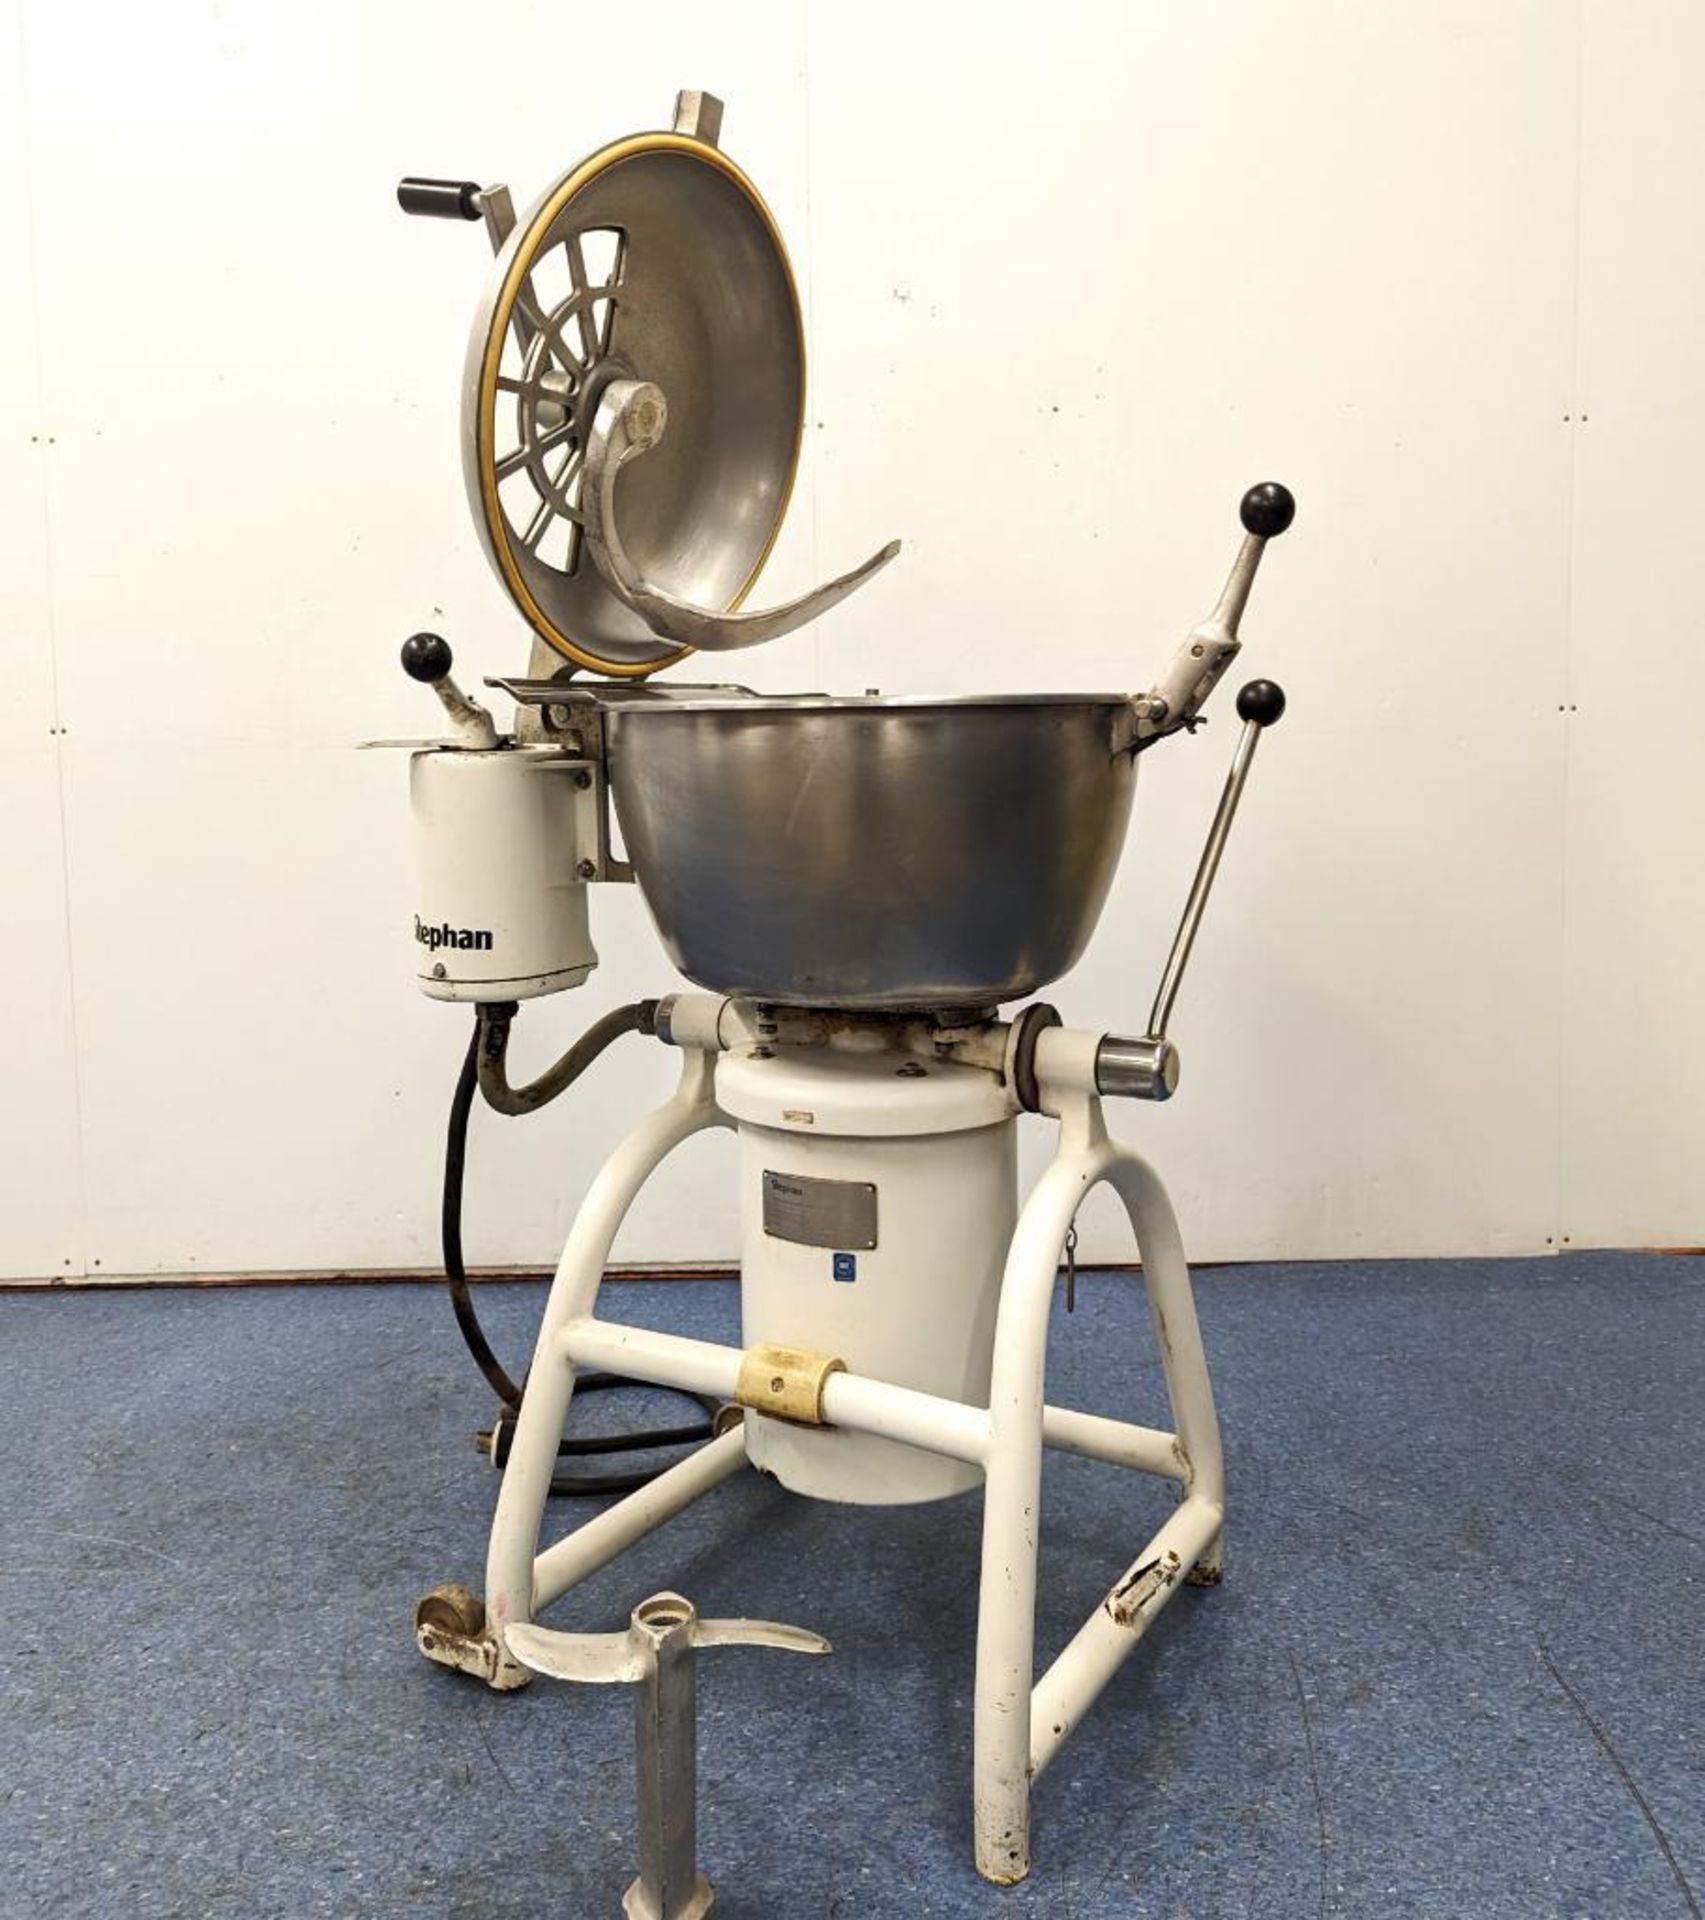 STEPHAN VCM-40 VERTICAL CUTTER/MIXER WITH MIX SHAFT - Image 5 of 14